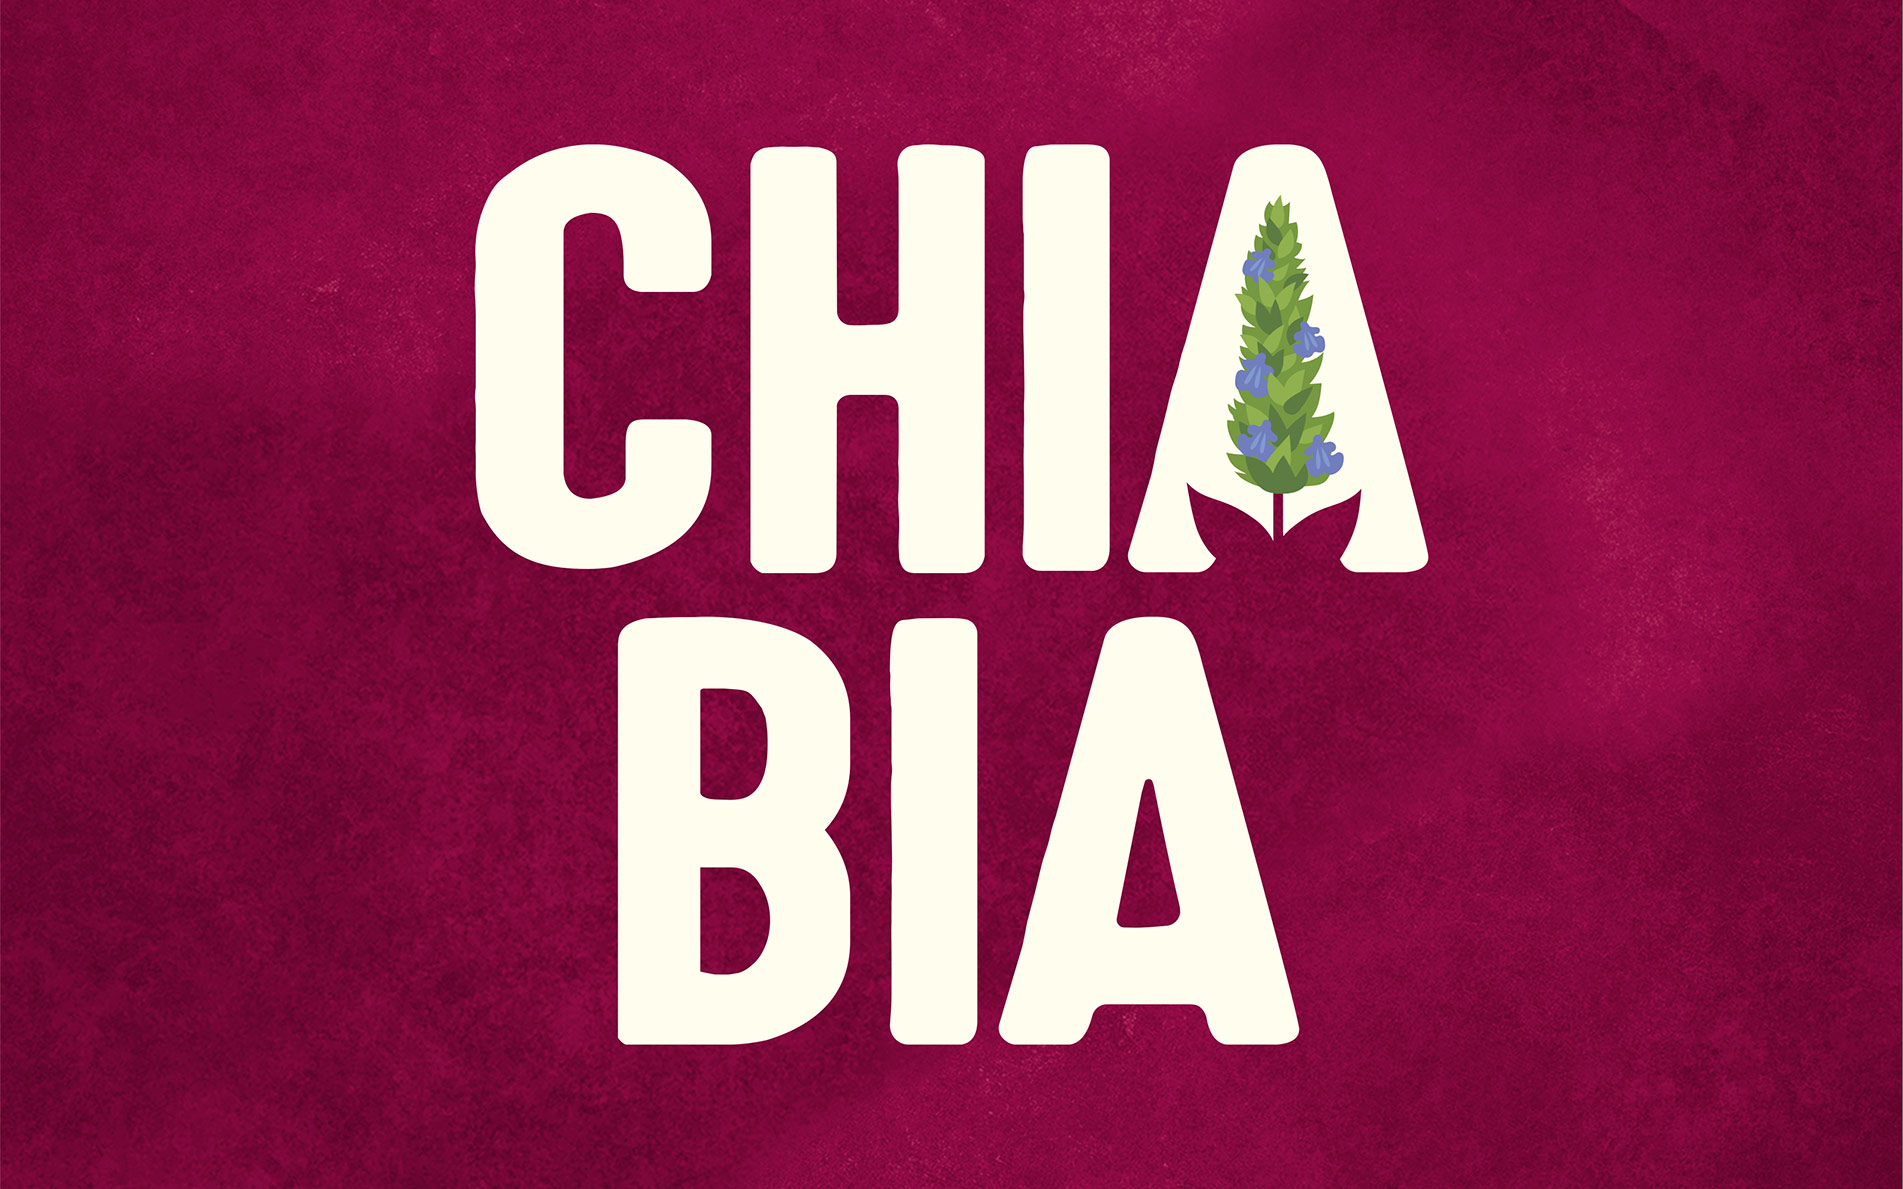 Chia Bia packaging design before and after - Rylands Brand Design